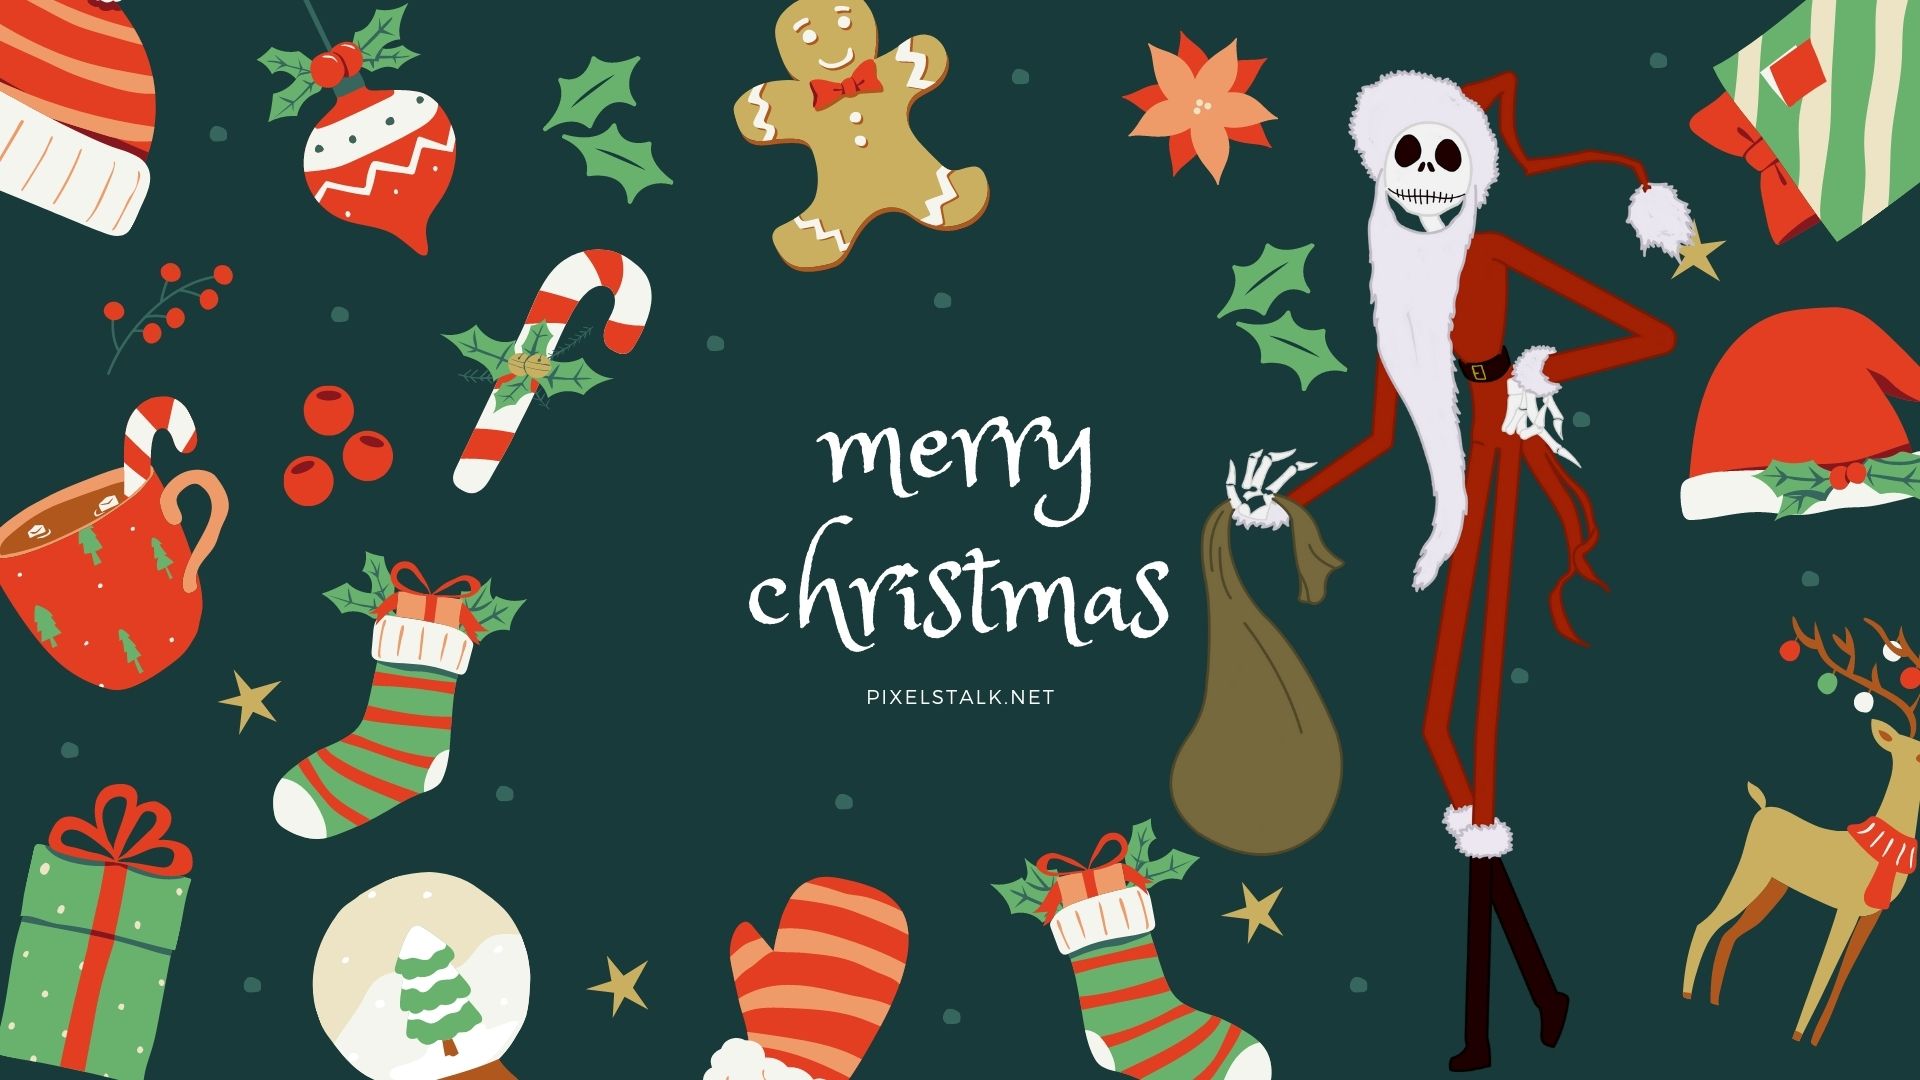 Nightmare Before Christmas Free Hd Wallpapers Hd Background Pictures Of  Jack From Nightmare Before Christmas Background Image And Wallpaper for  Free Download